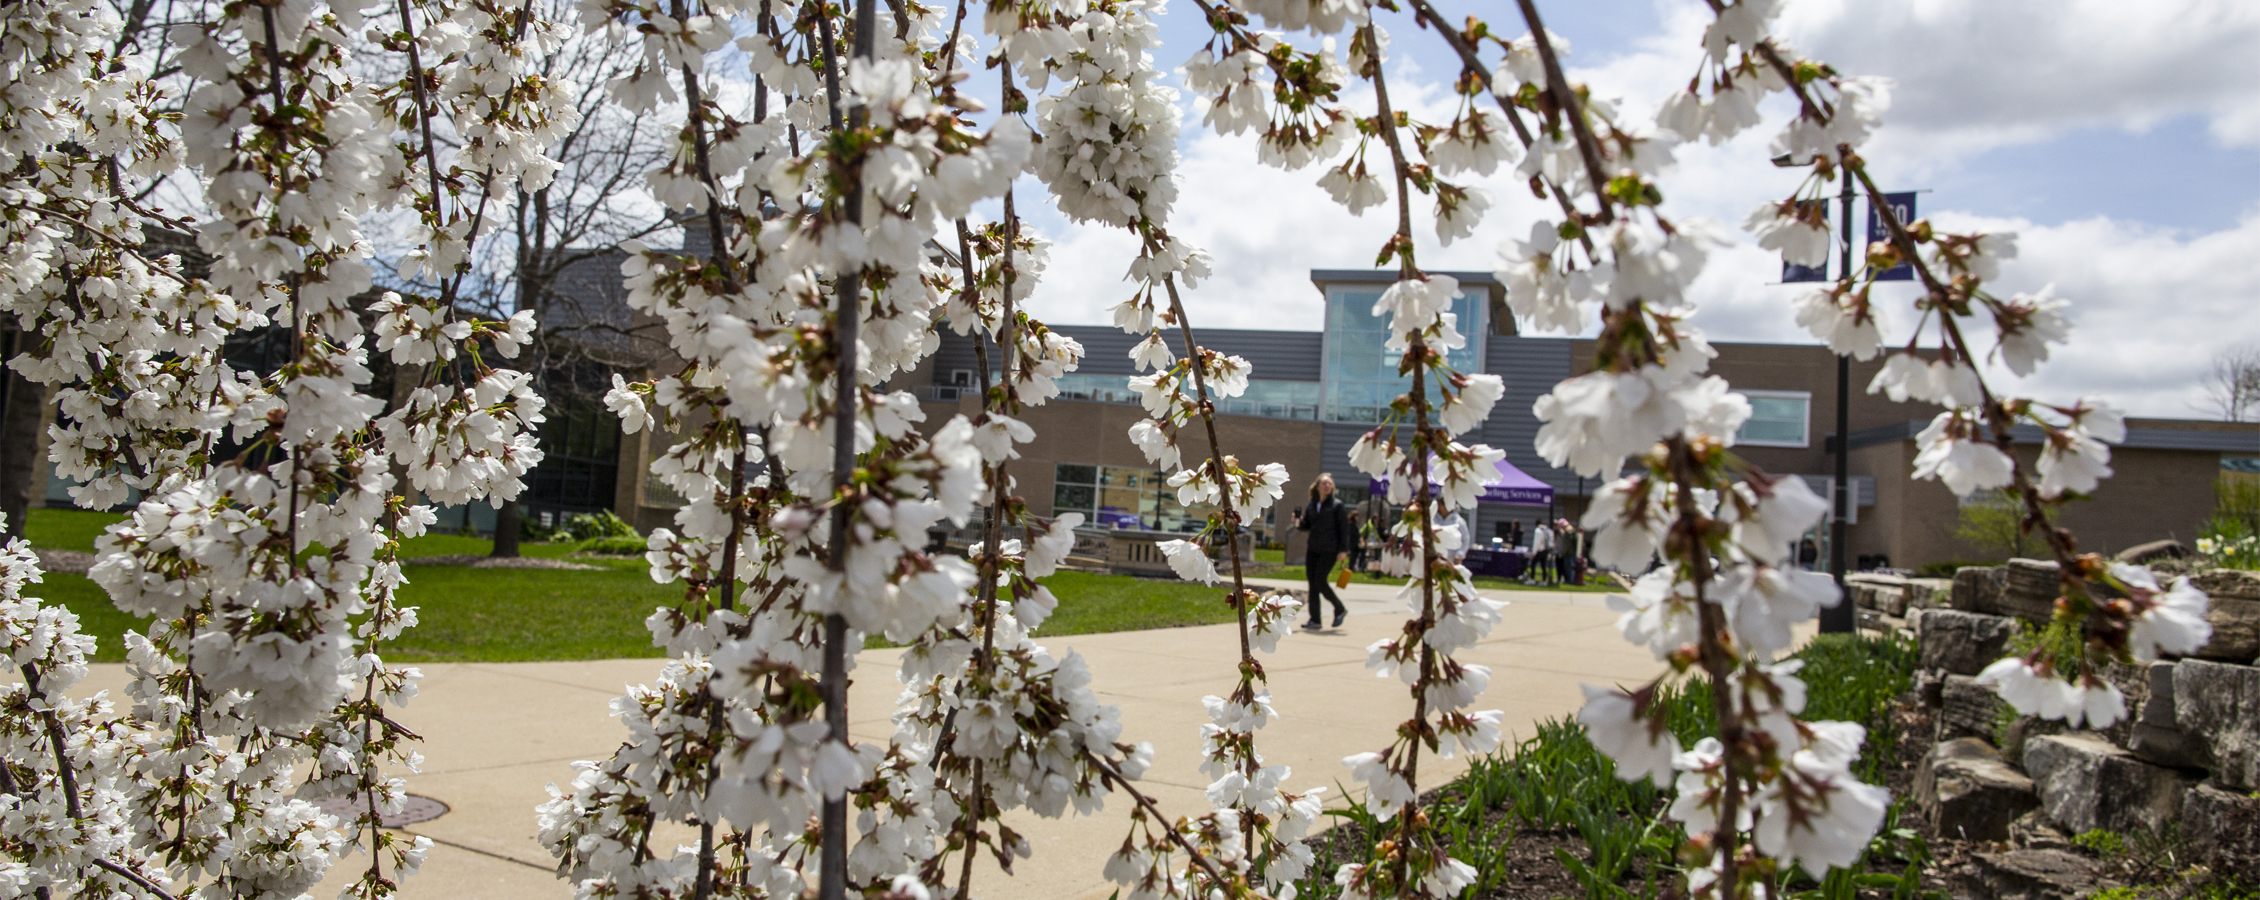 A flowering tree with white blooms in front of the University Center.